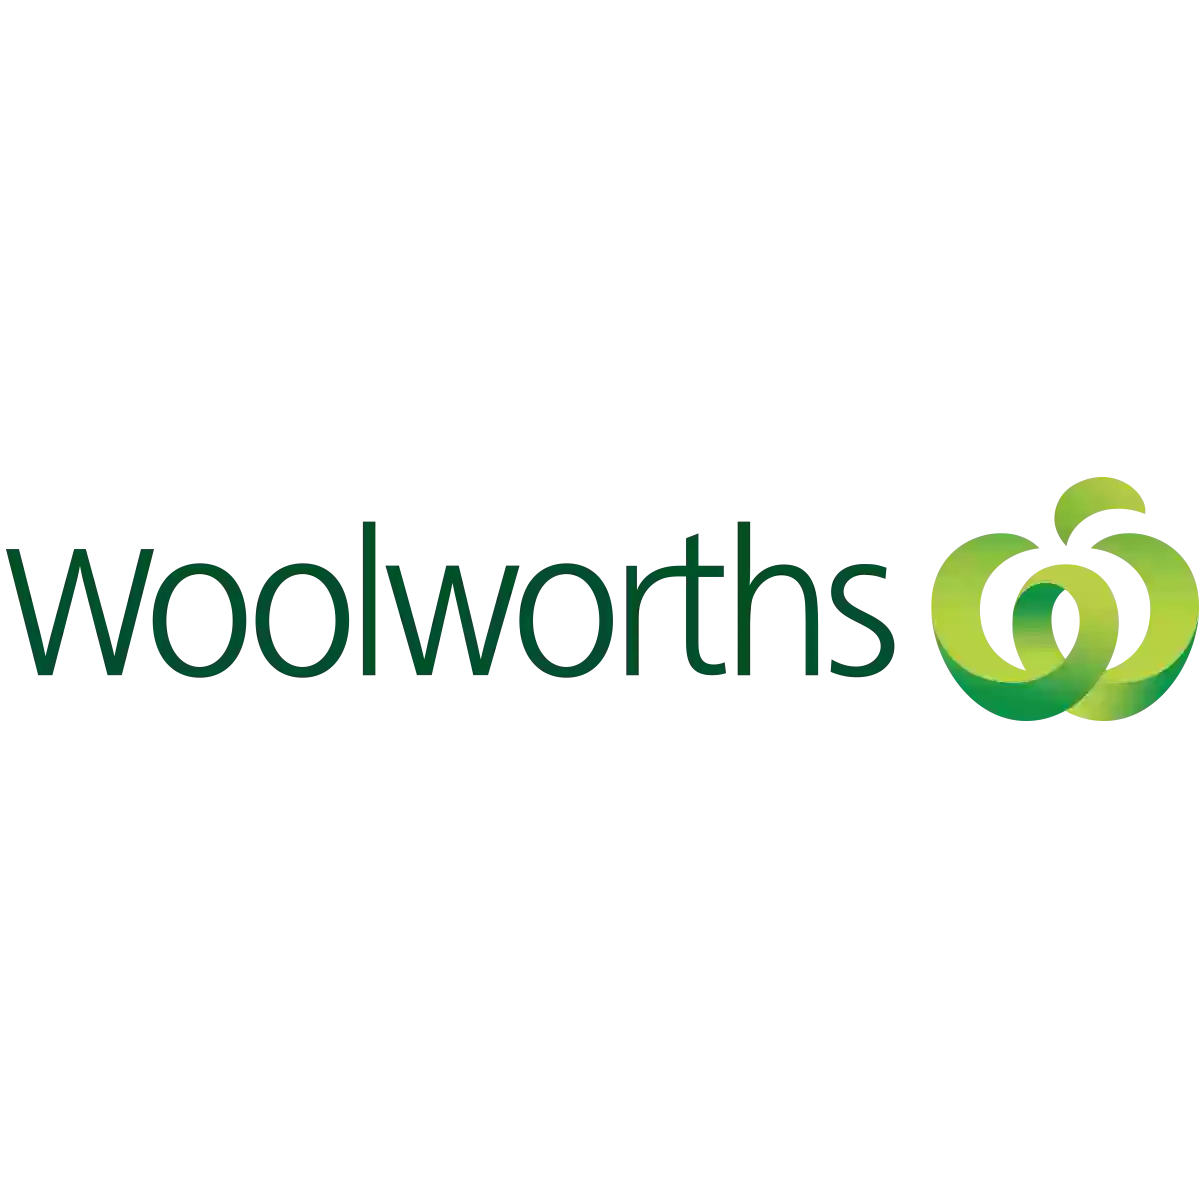 Woolworths Mascot